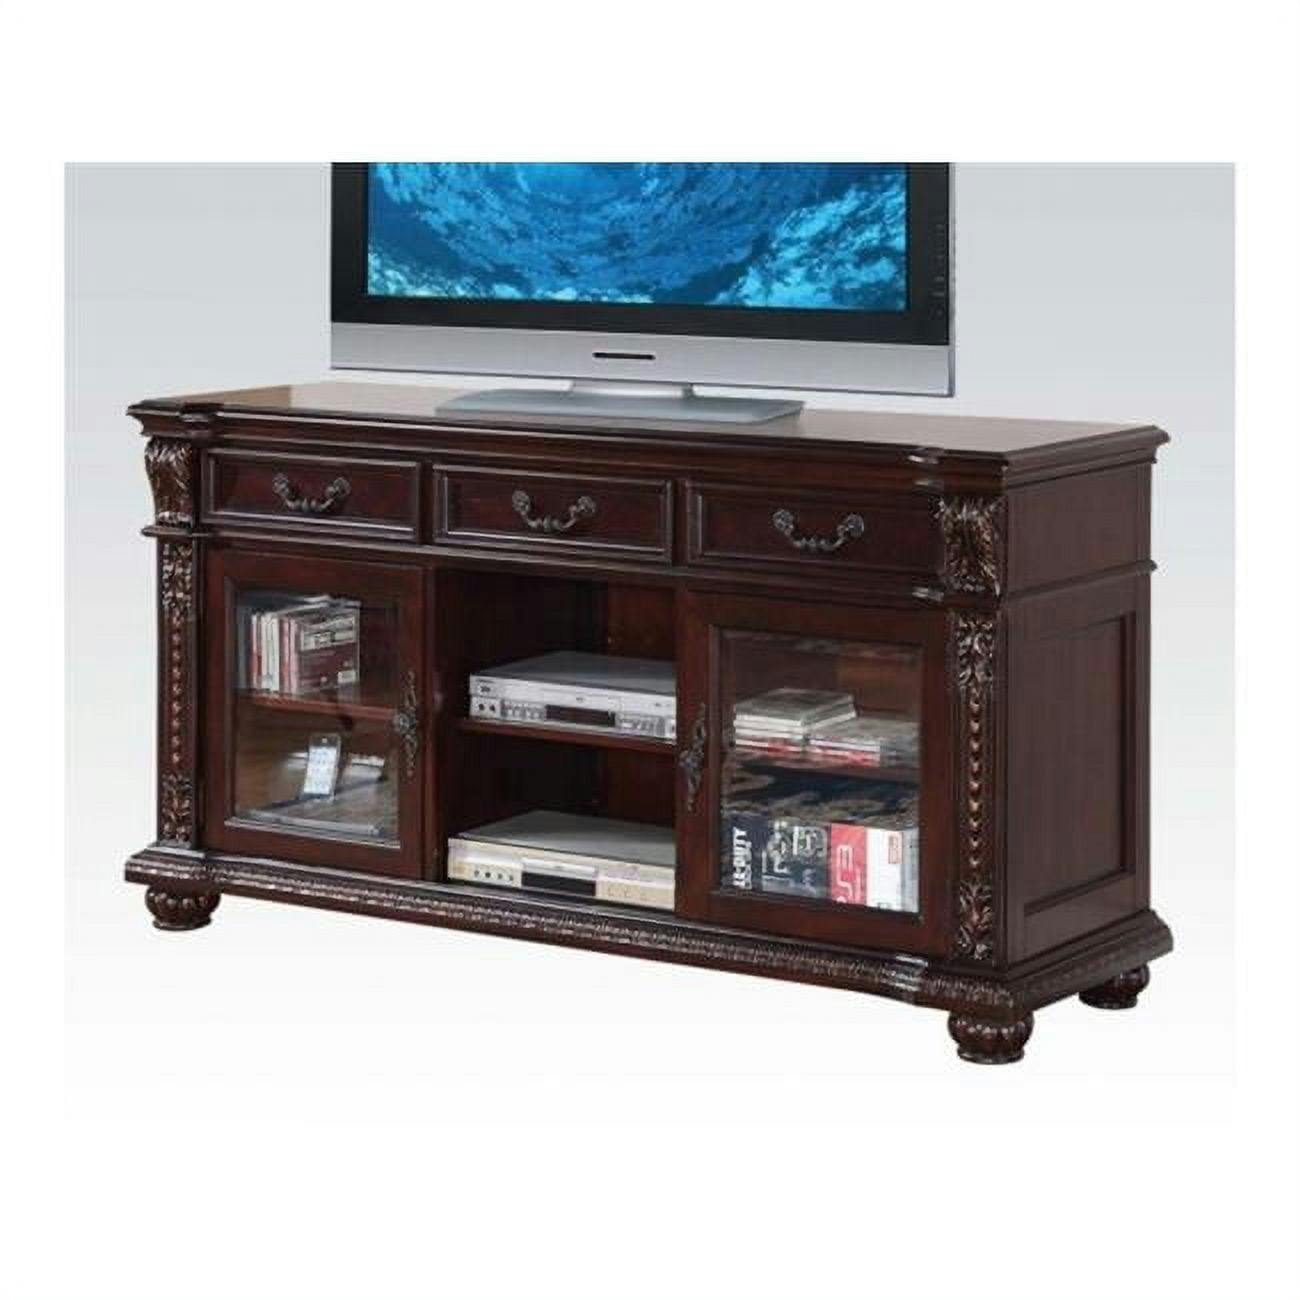 Cherry Finish Elegance 66" Wooden TV Stand with Glass Doors